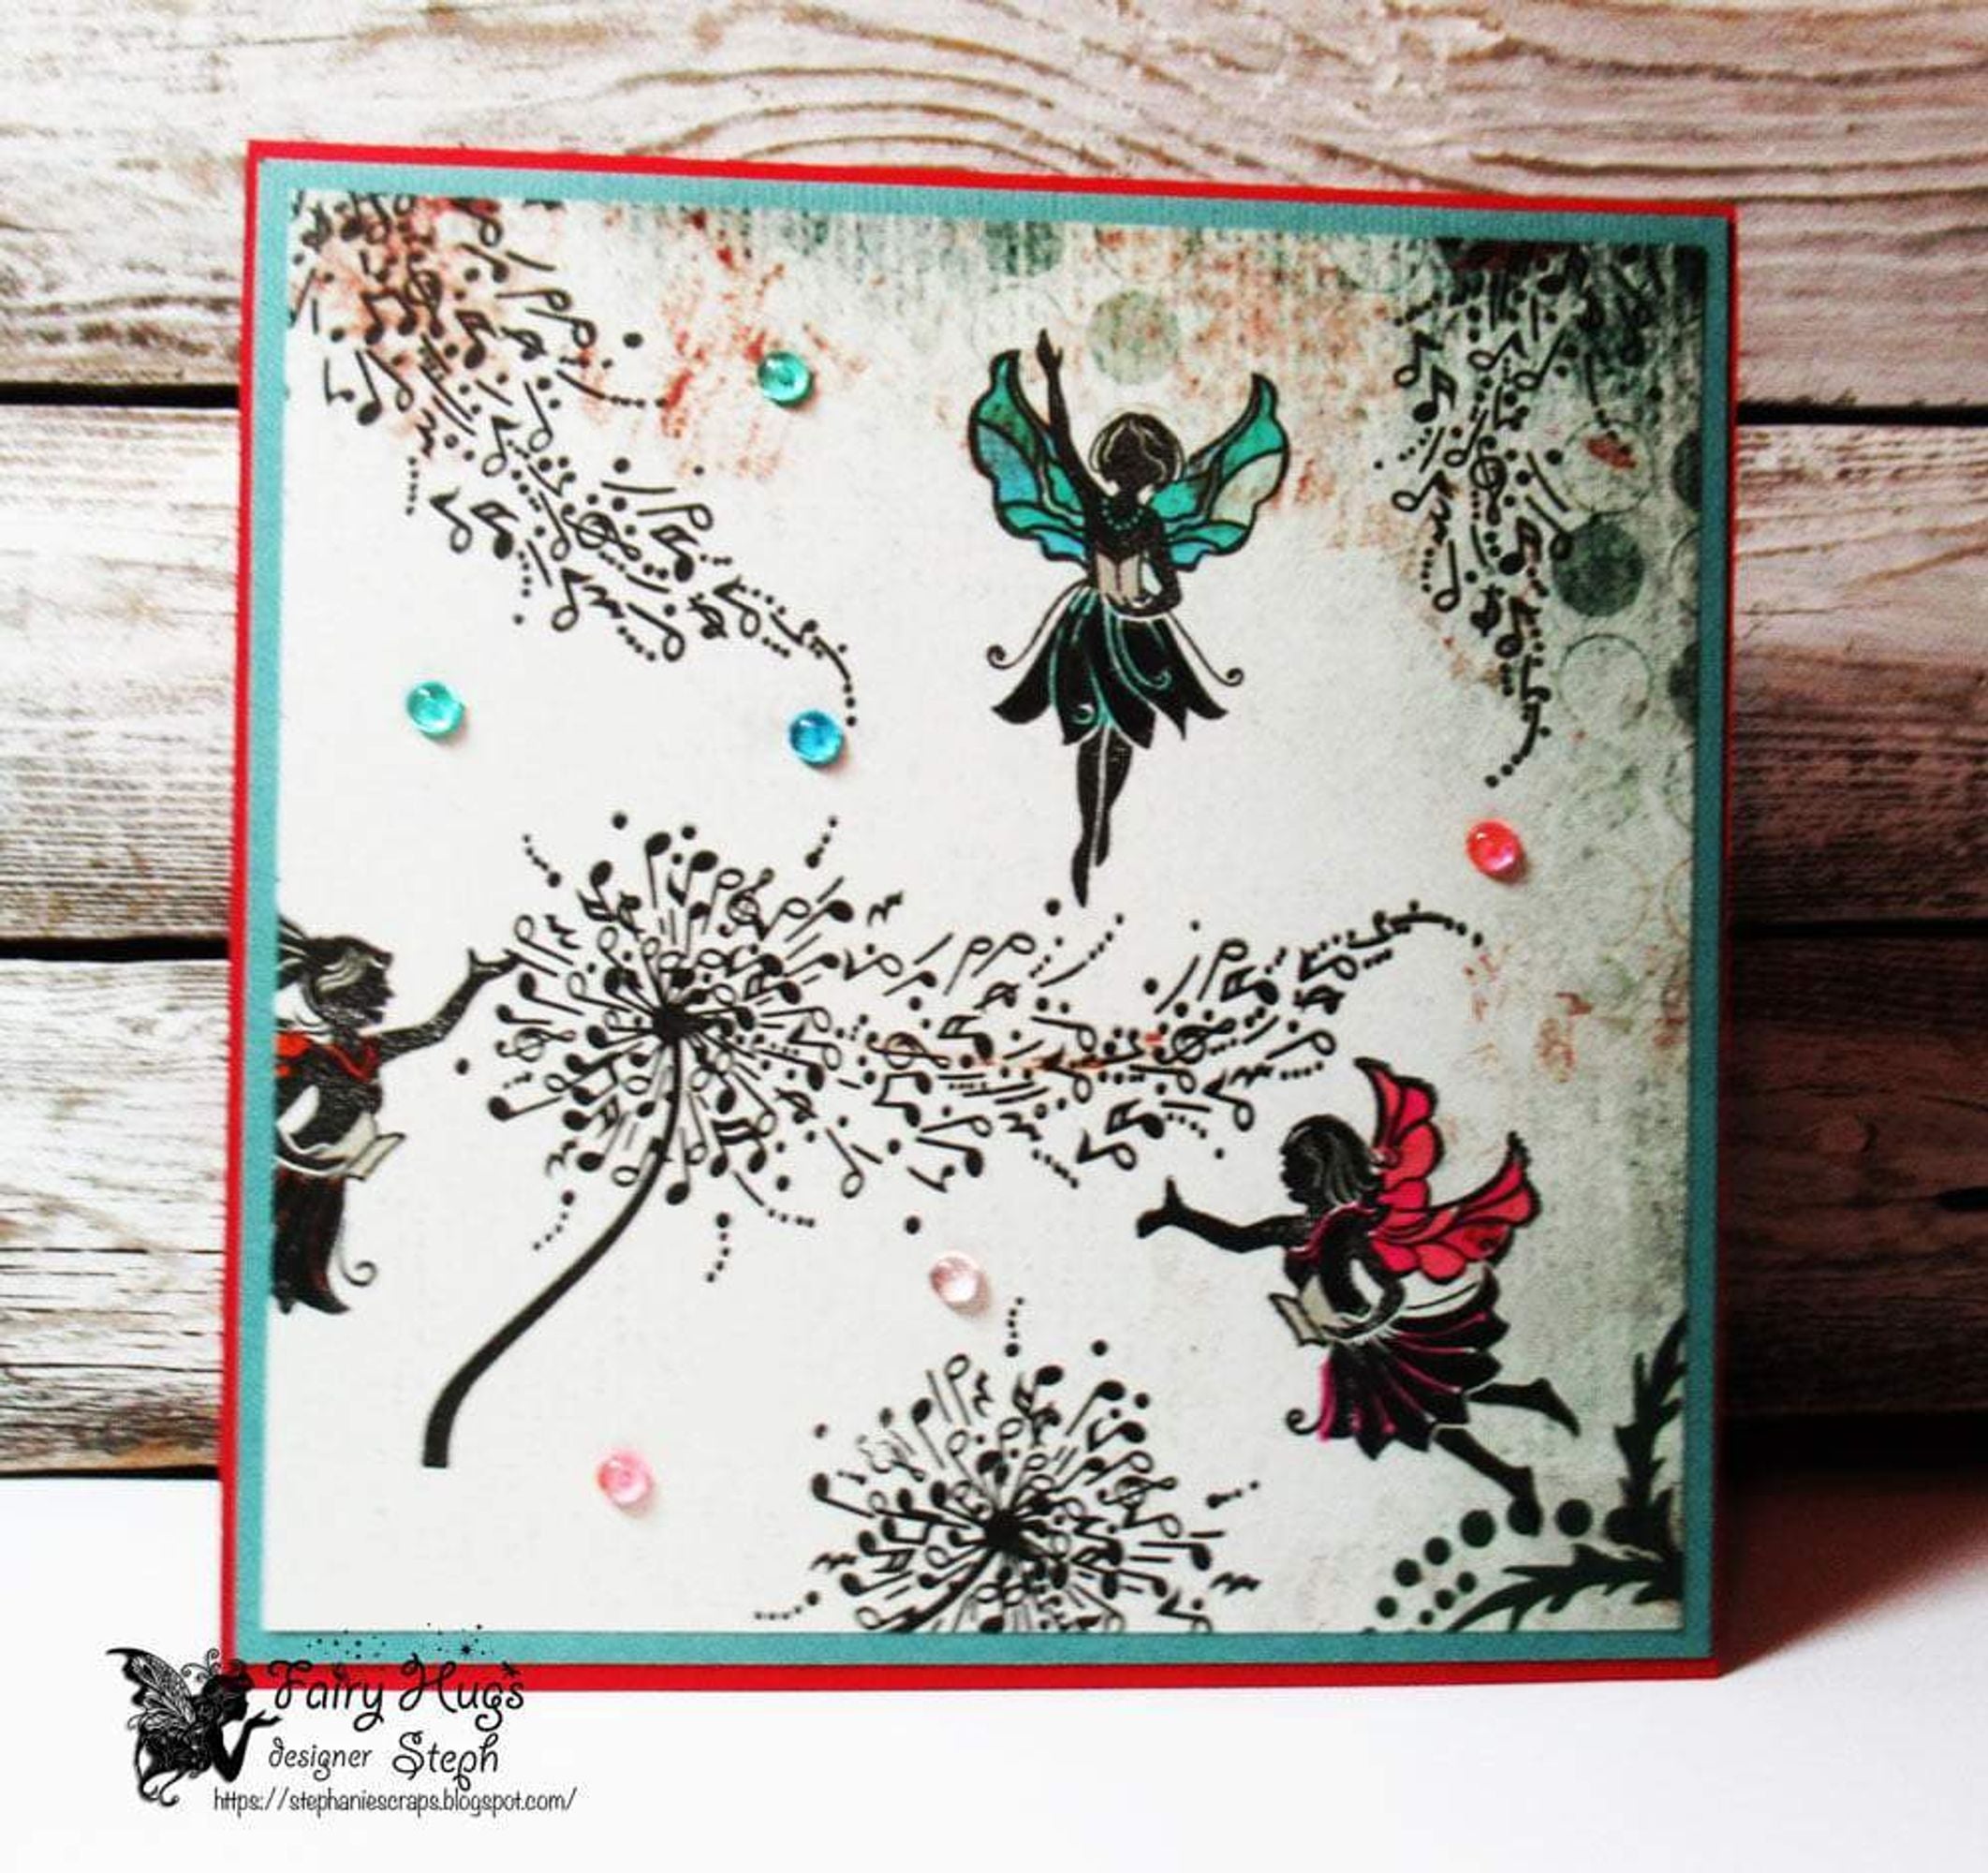 Fairy Hugs Stamps - Melody